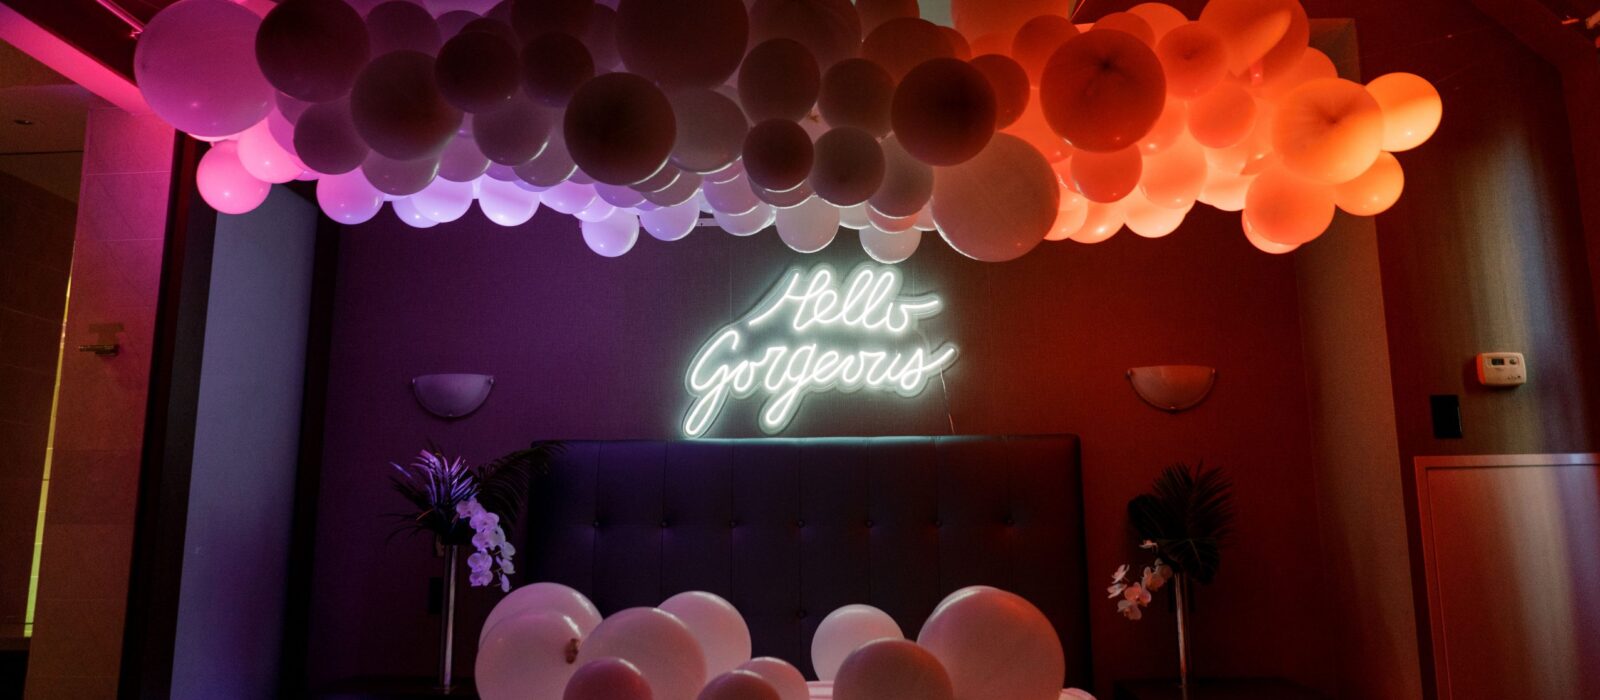 Electric Bedroom photobooth with balloons and LED lighting at One King West Hotel's Summer Social